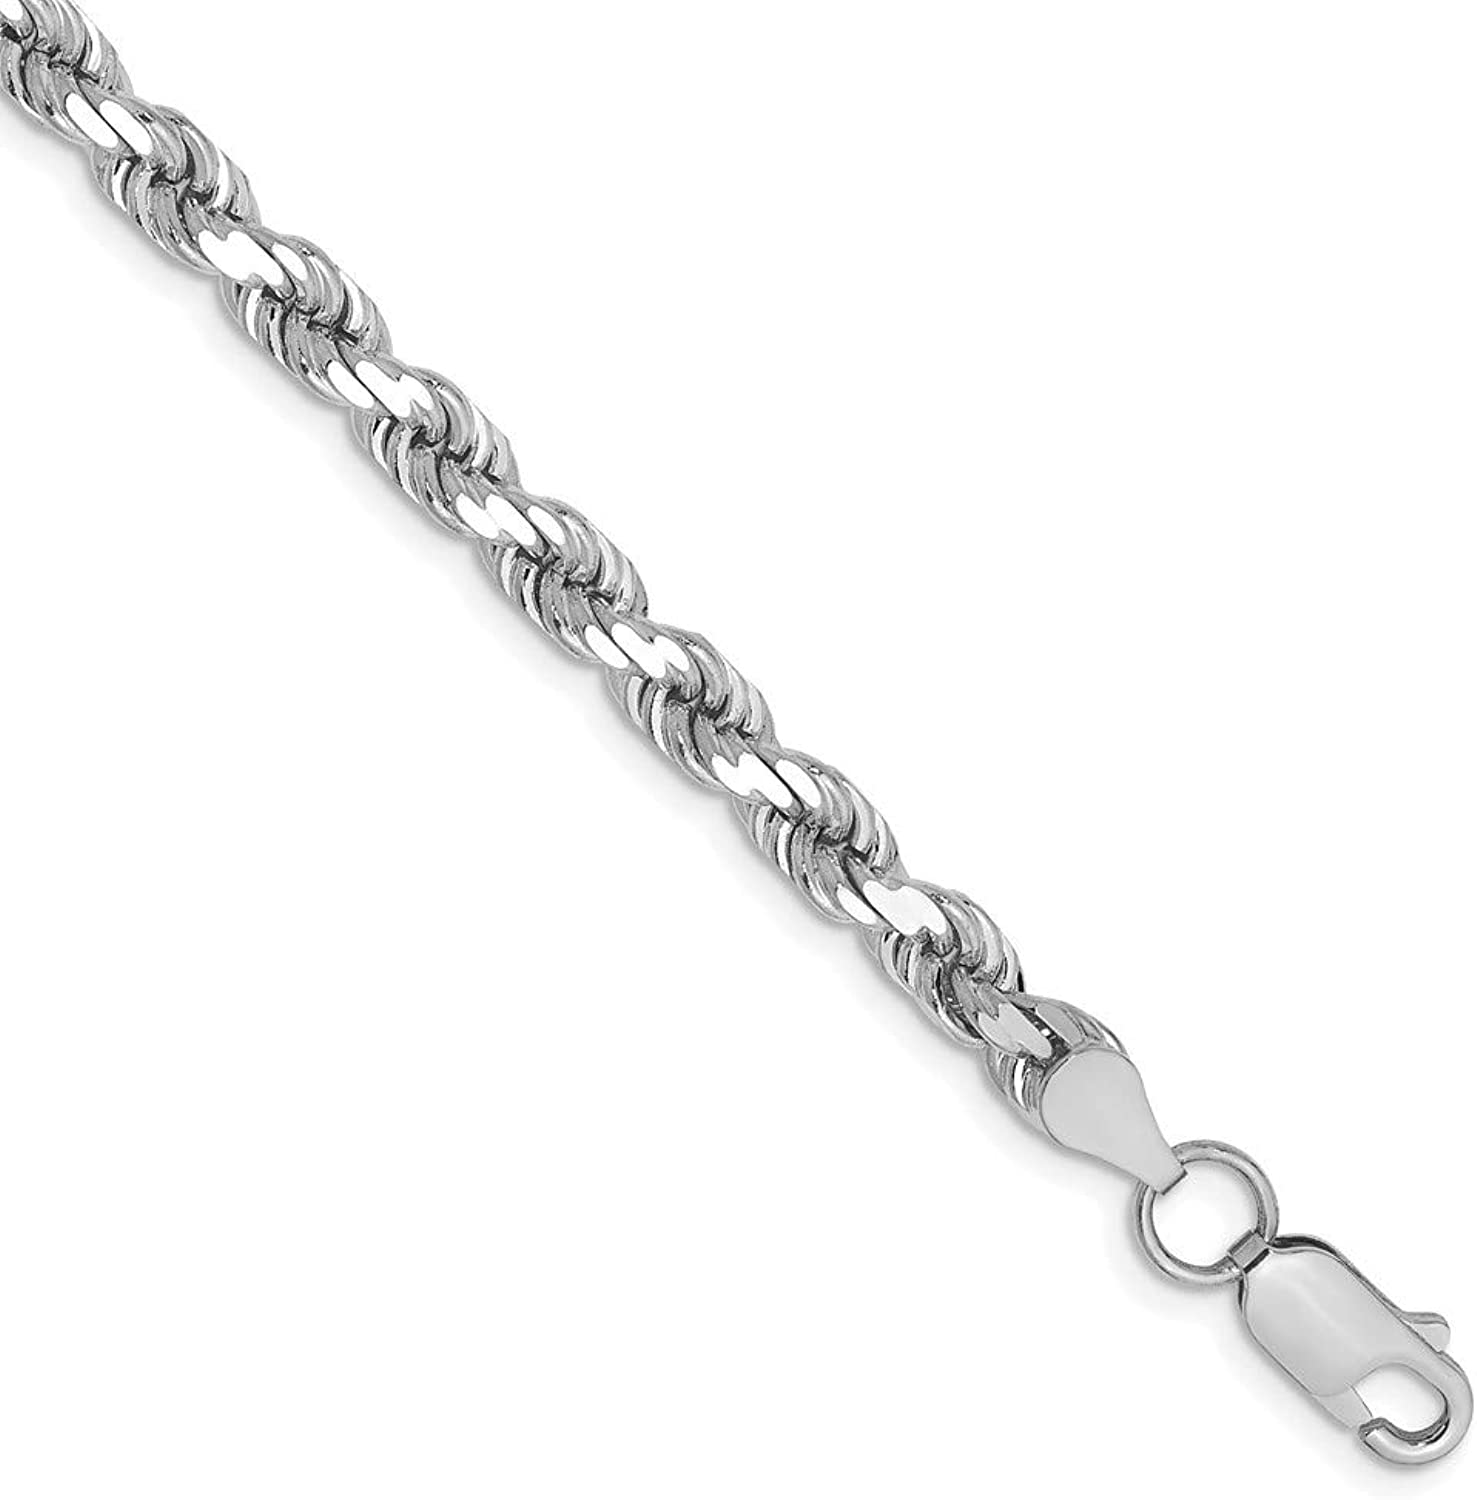 14k White Gold 4.5mm D/C Rope with Lobster Clasp Chain 8in 4.5mm style 035W-8